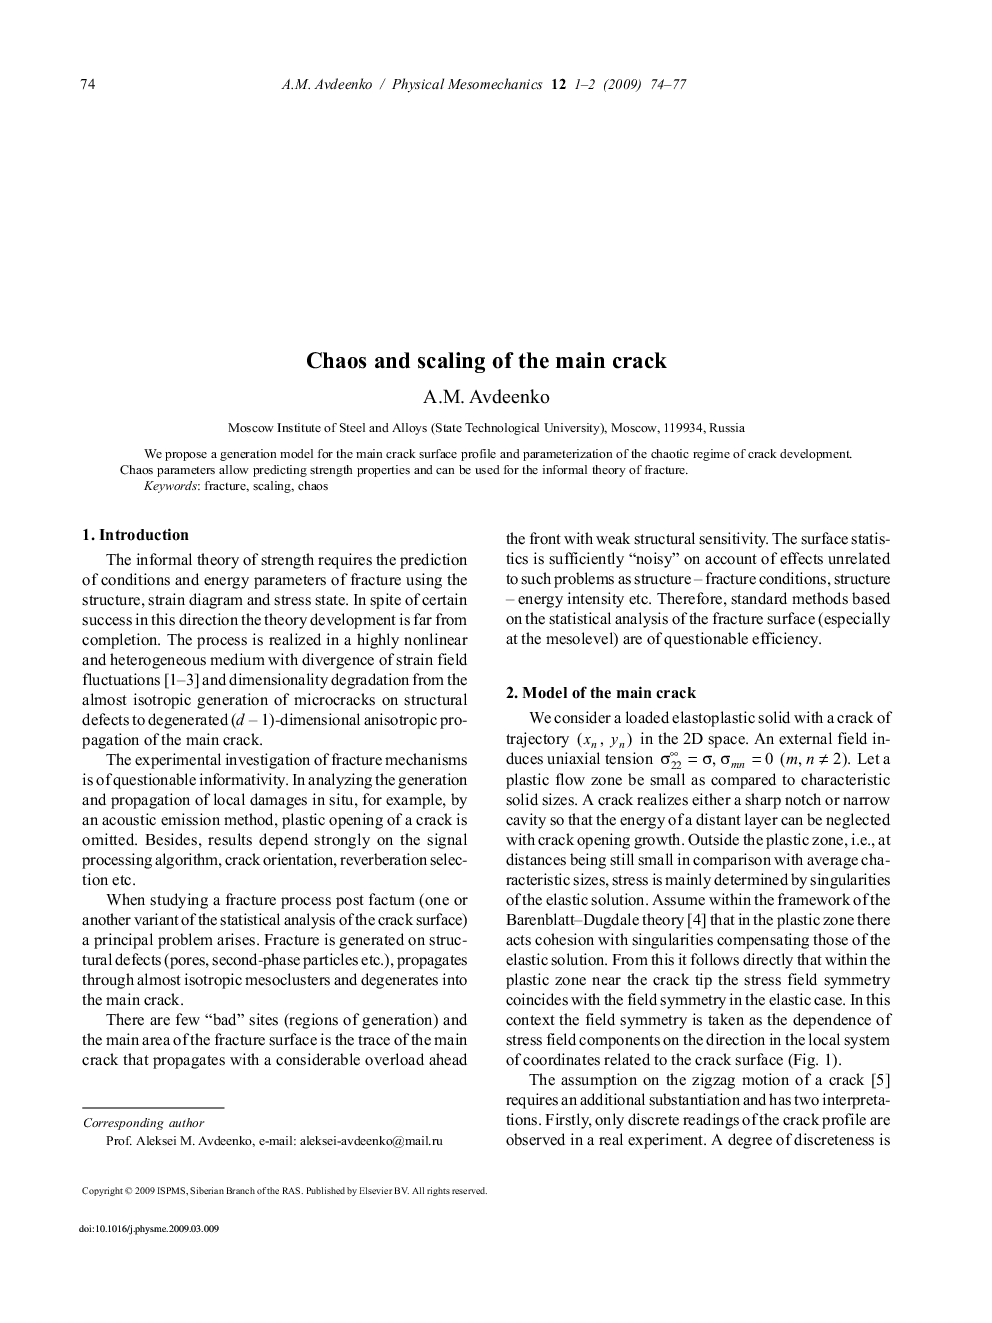 Chaos and scaling of the main crack